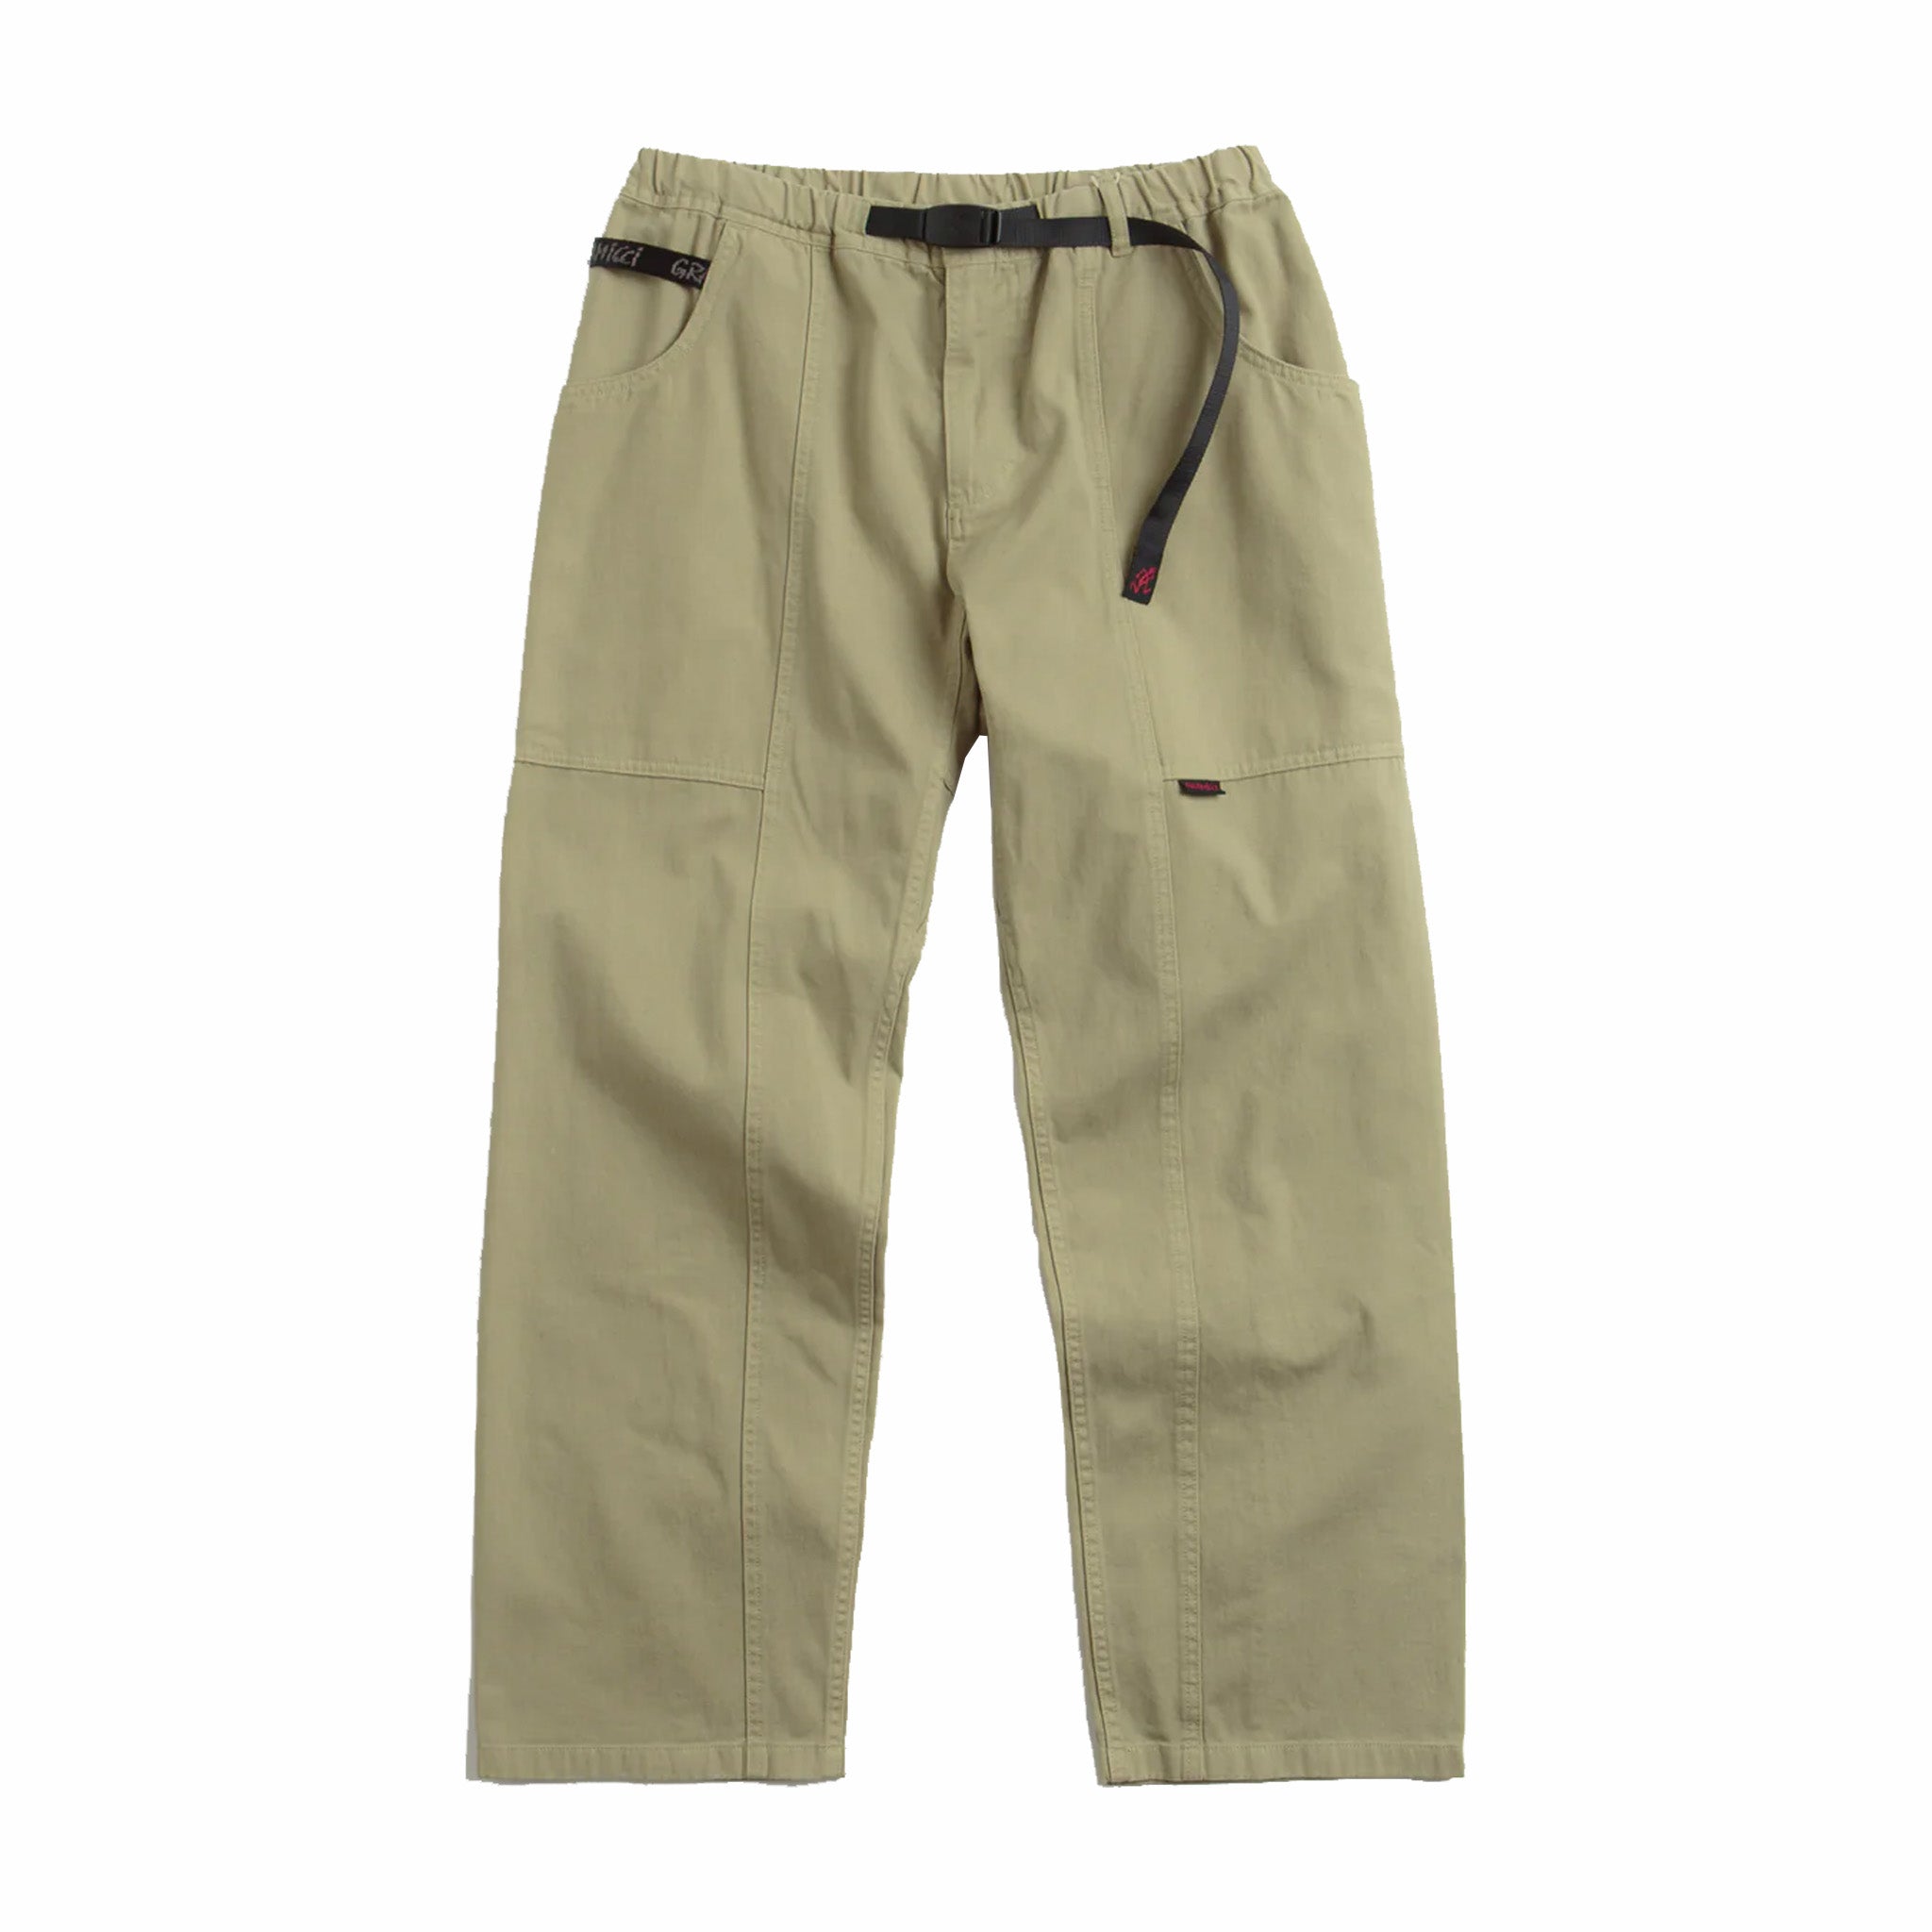 Gramicci Gadget Pant (Faded Olive) - August Shop